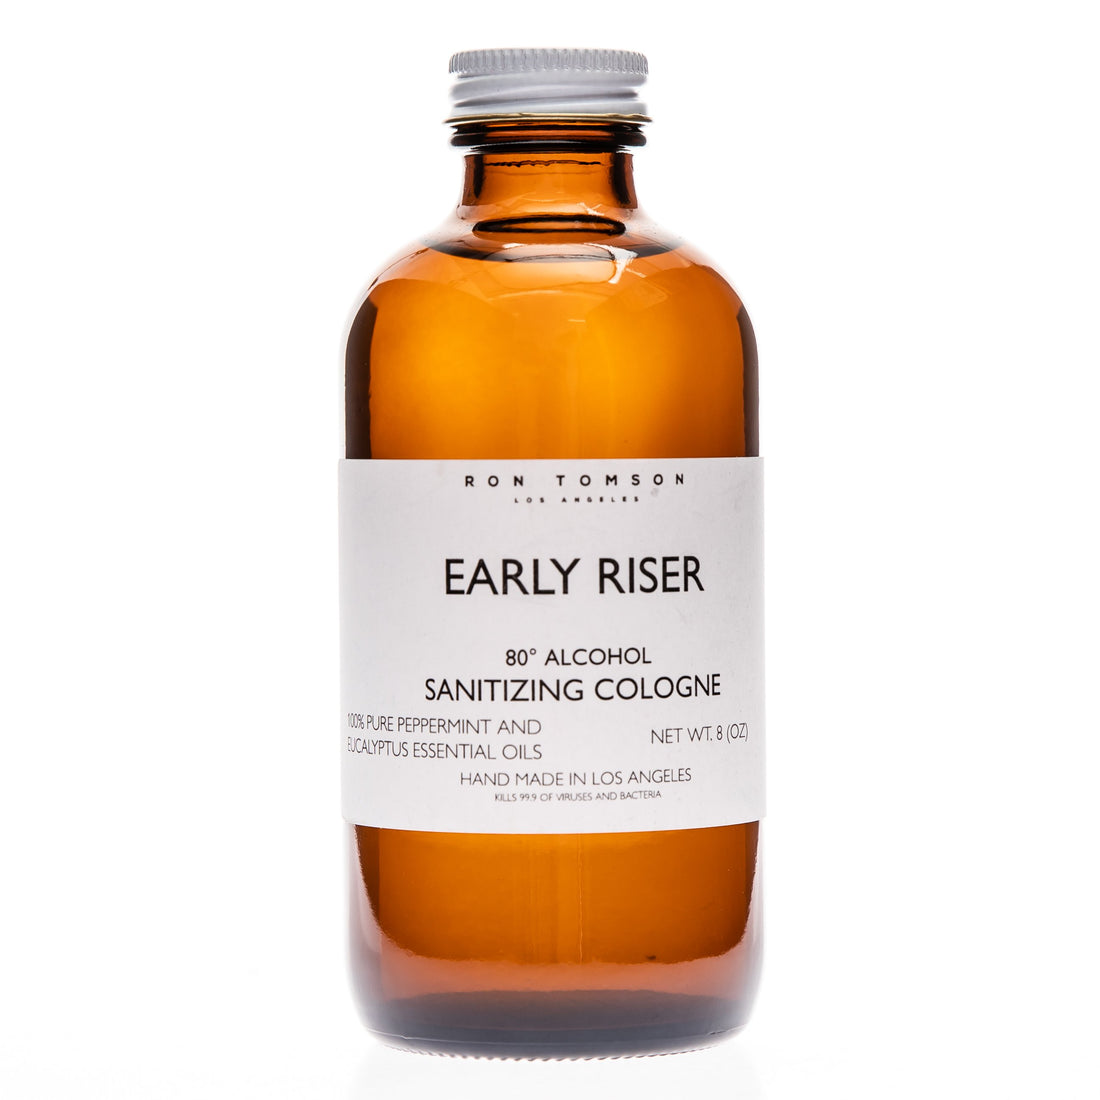 Early Riser Sanitizing Cologne - Ron Tomson